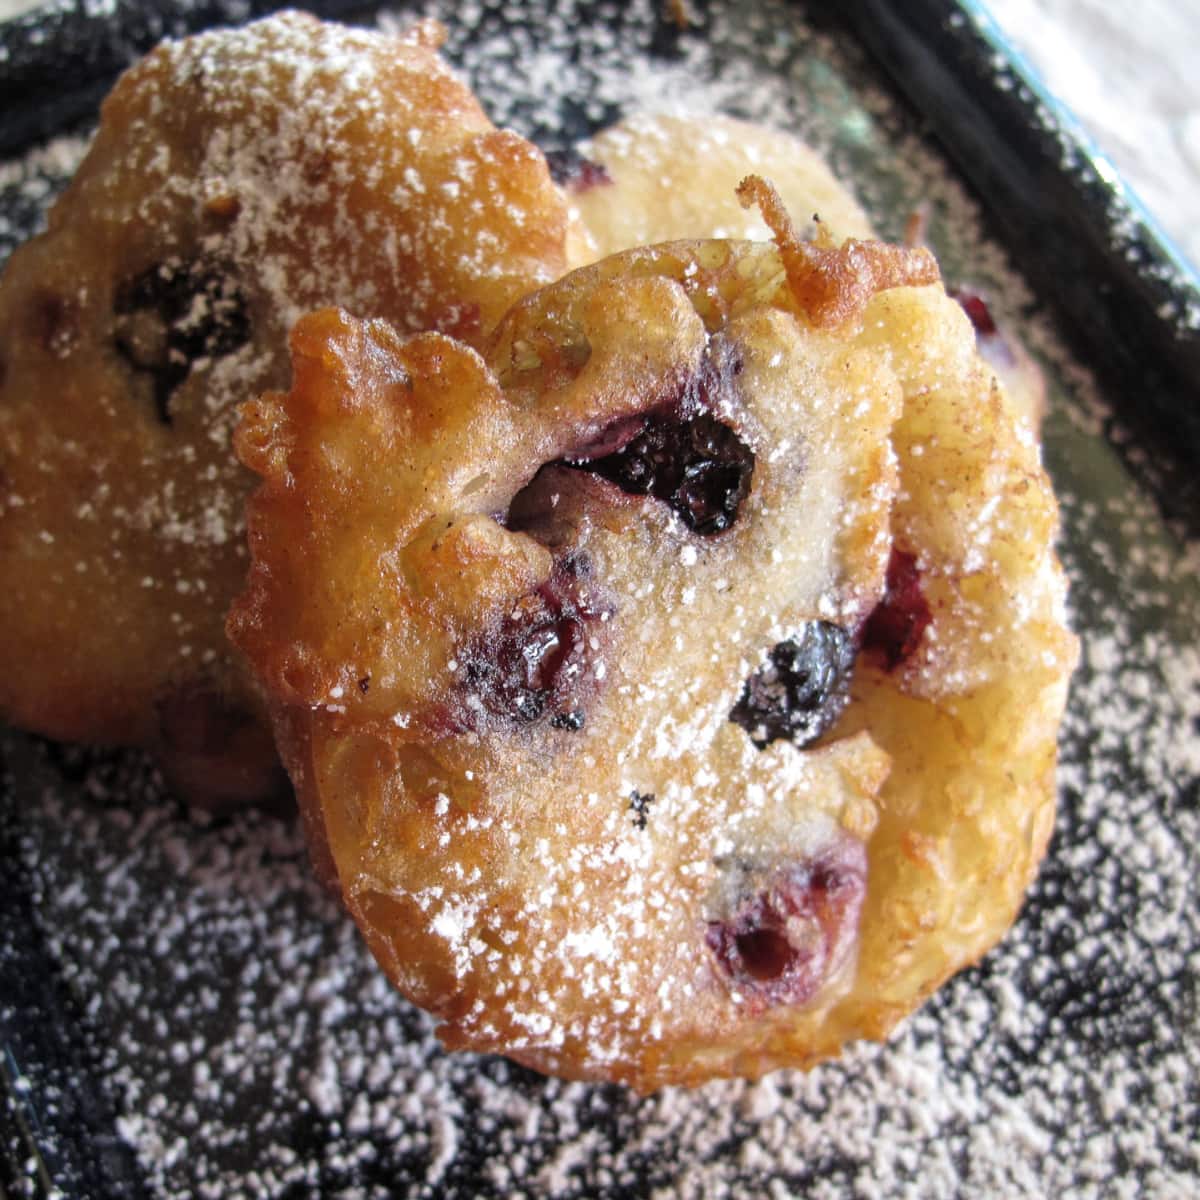 Blueberry fritters on a black plate.